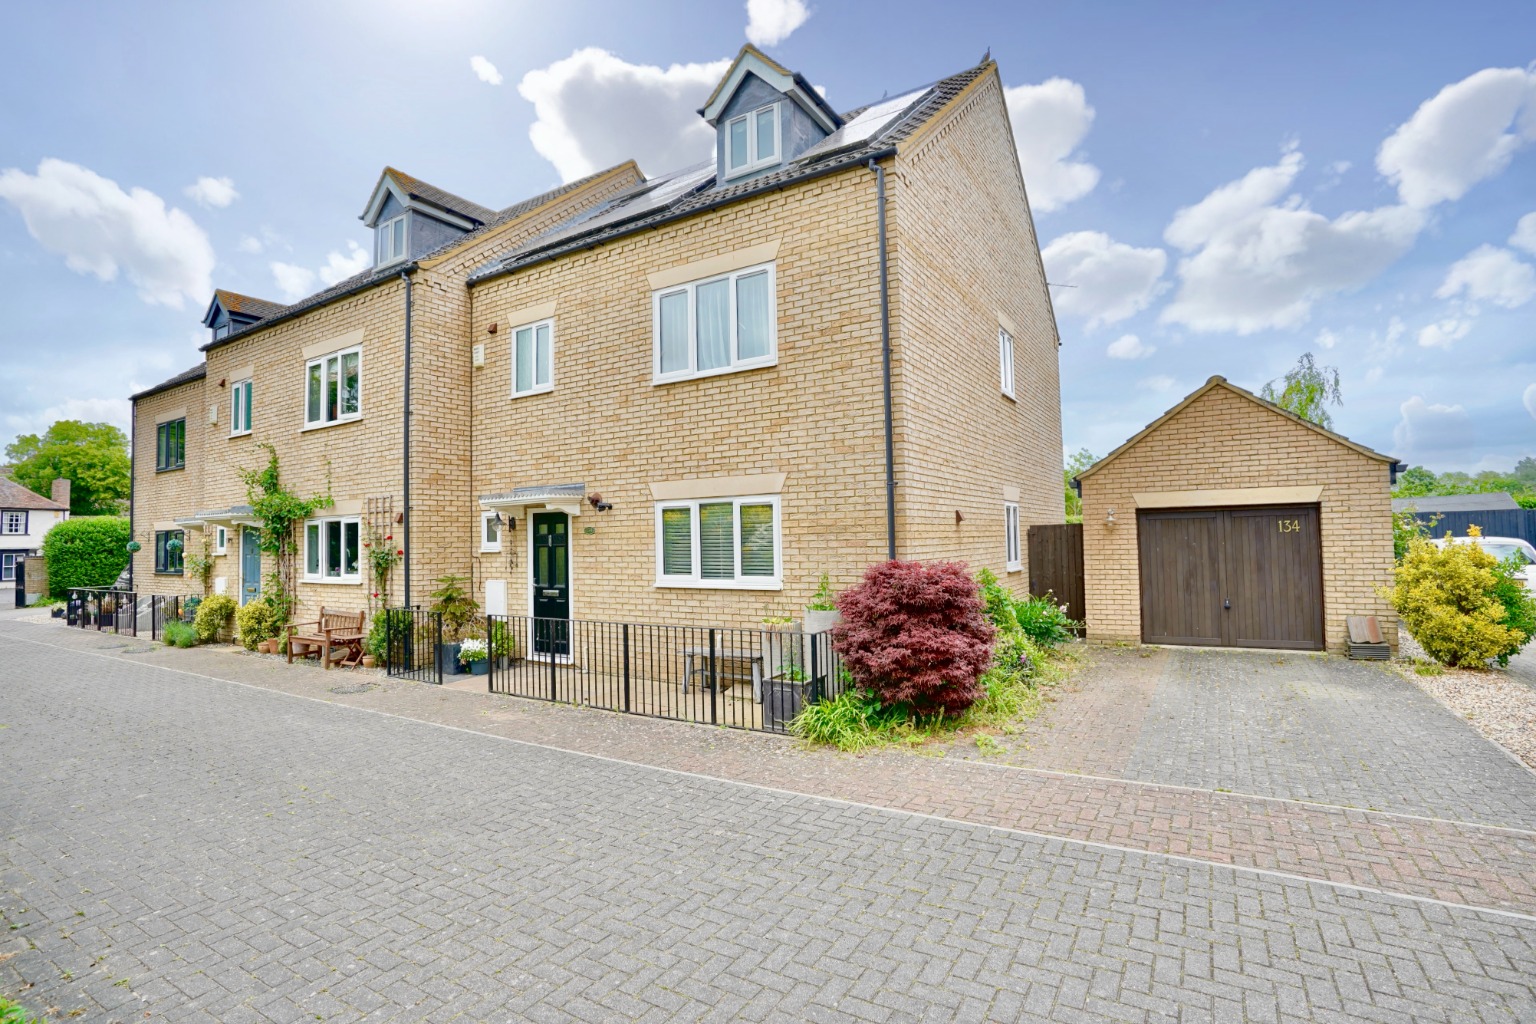 4 bed town house for sale in St. Neots Road, St. Neots, PE19